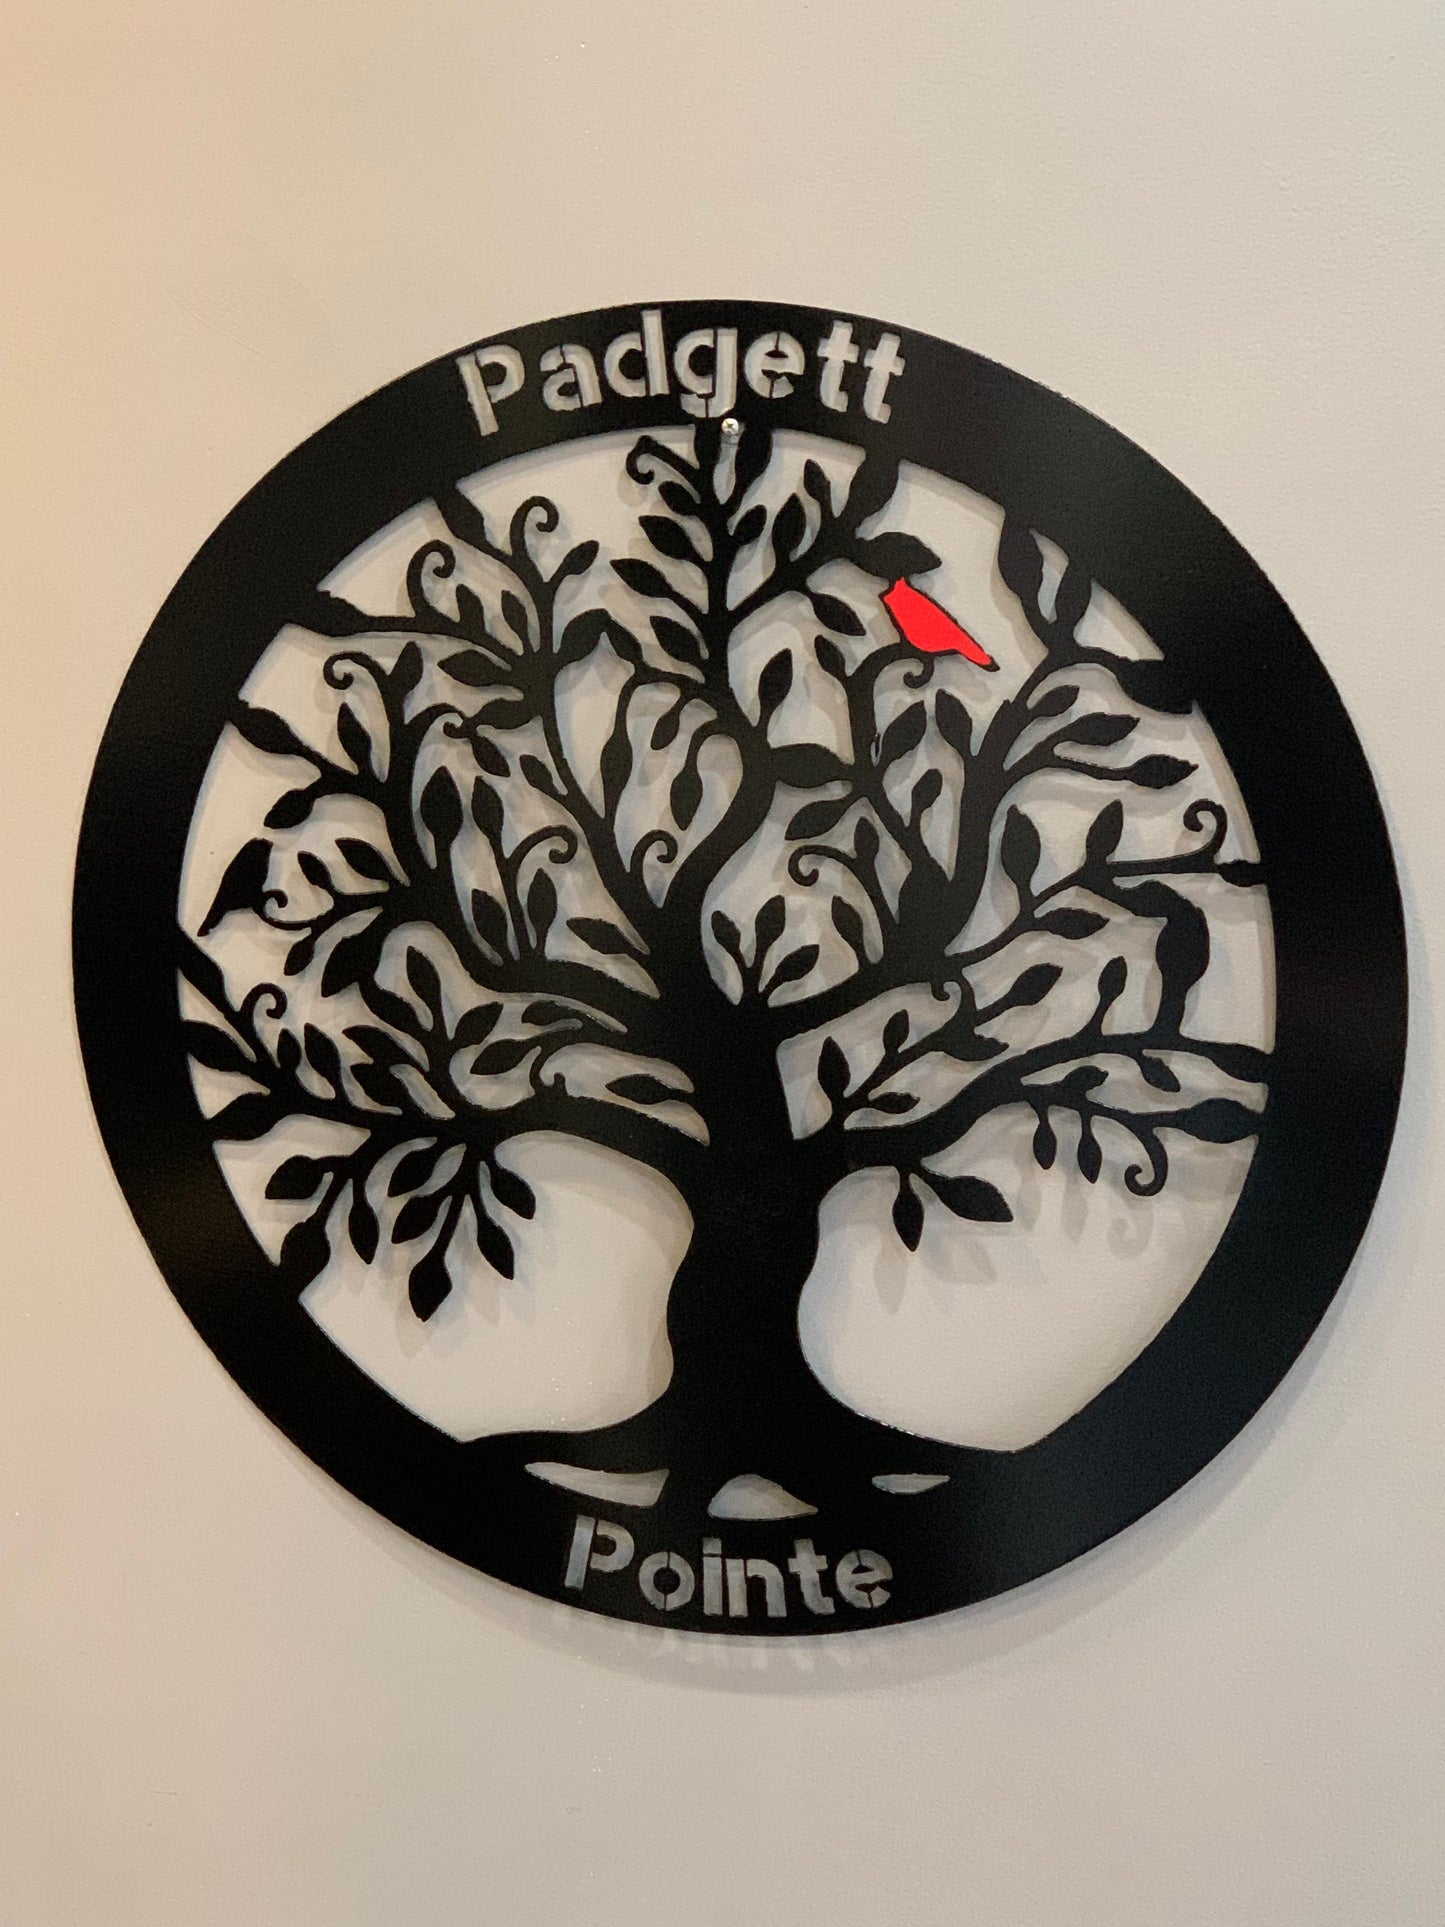 Tree of Life Metal Sign 12"- Wall Hang or Stake in Ground- with Redbird and Your message- Powder Coated Your color choice